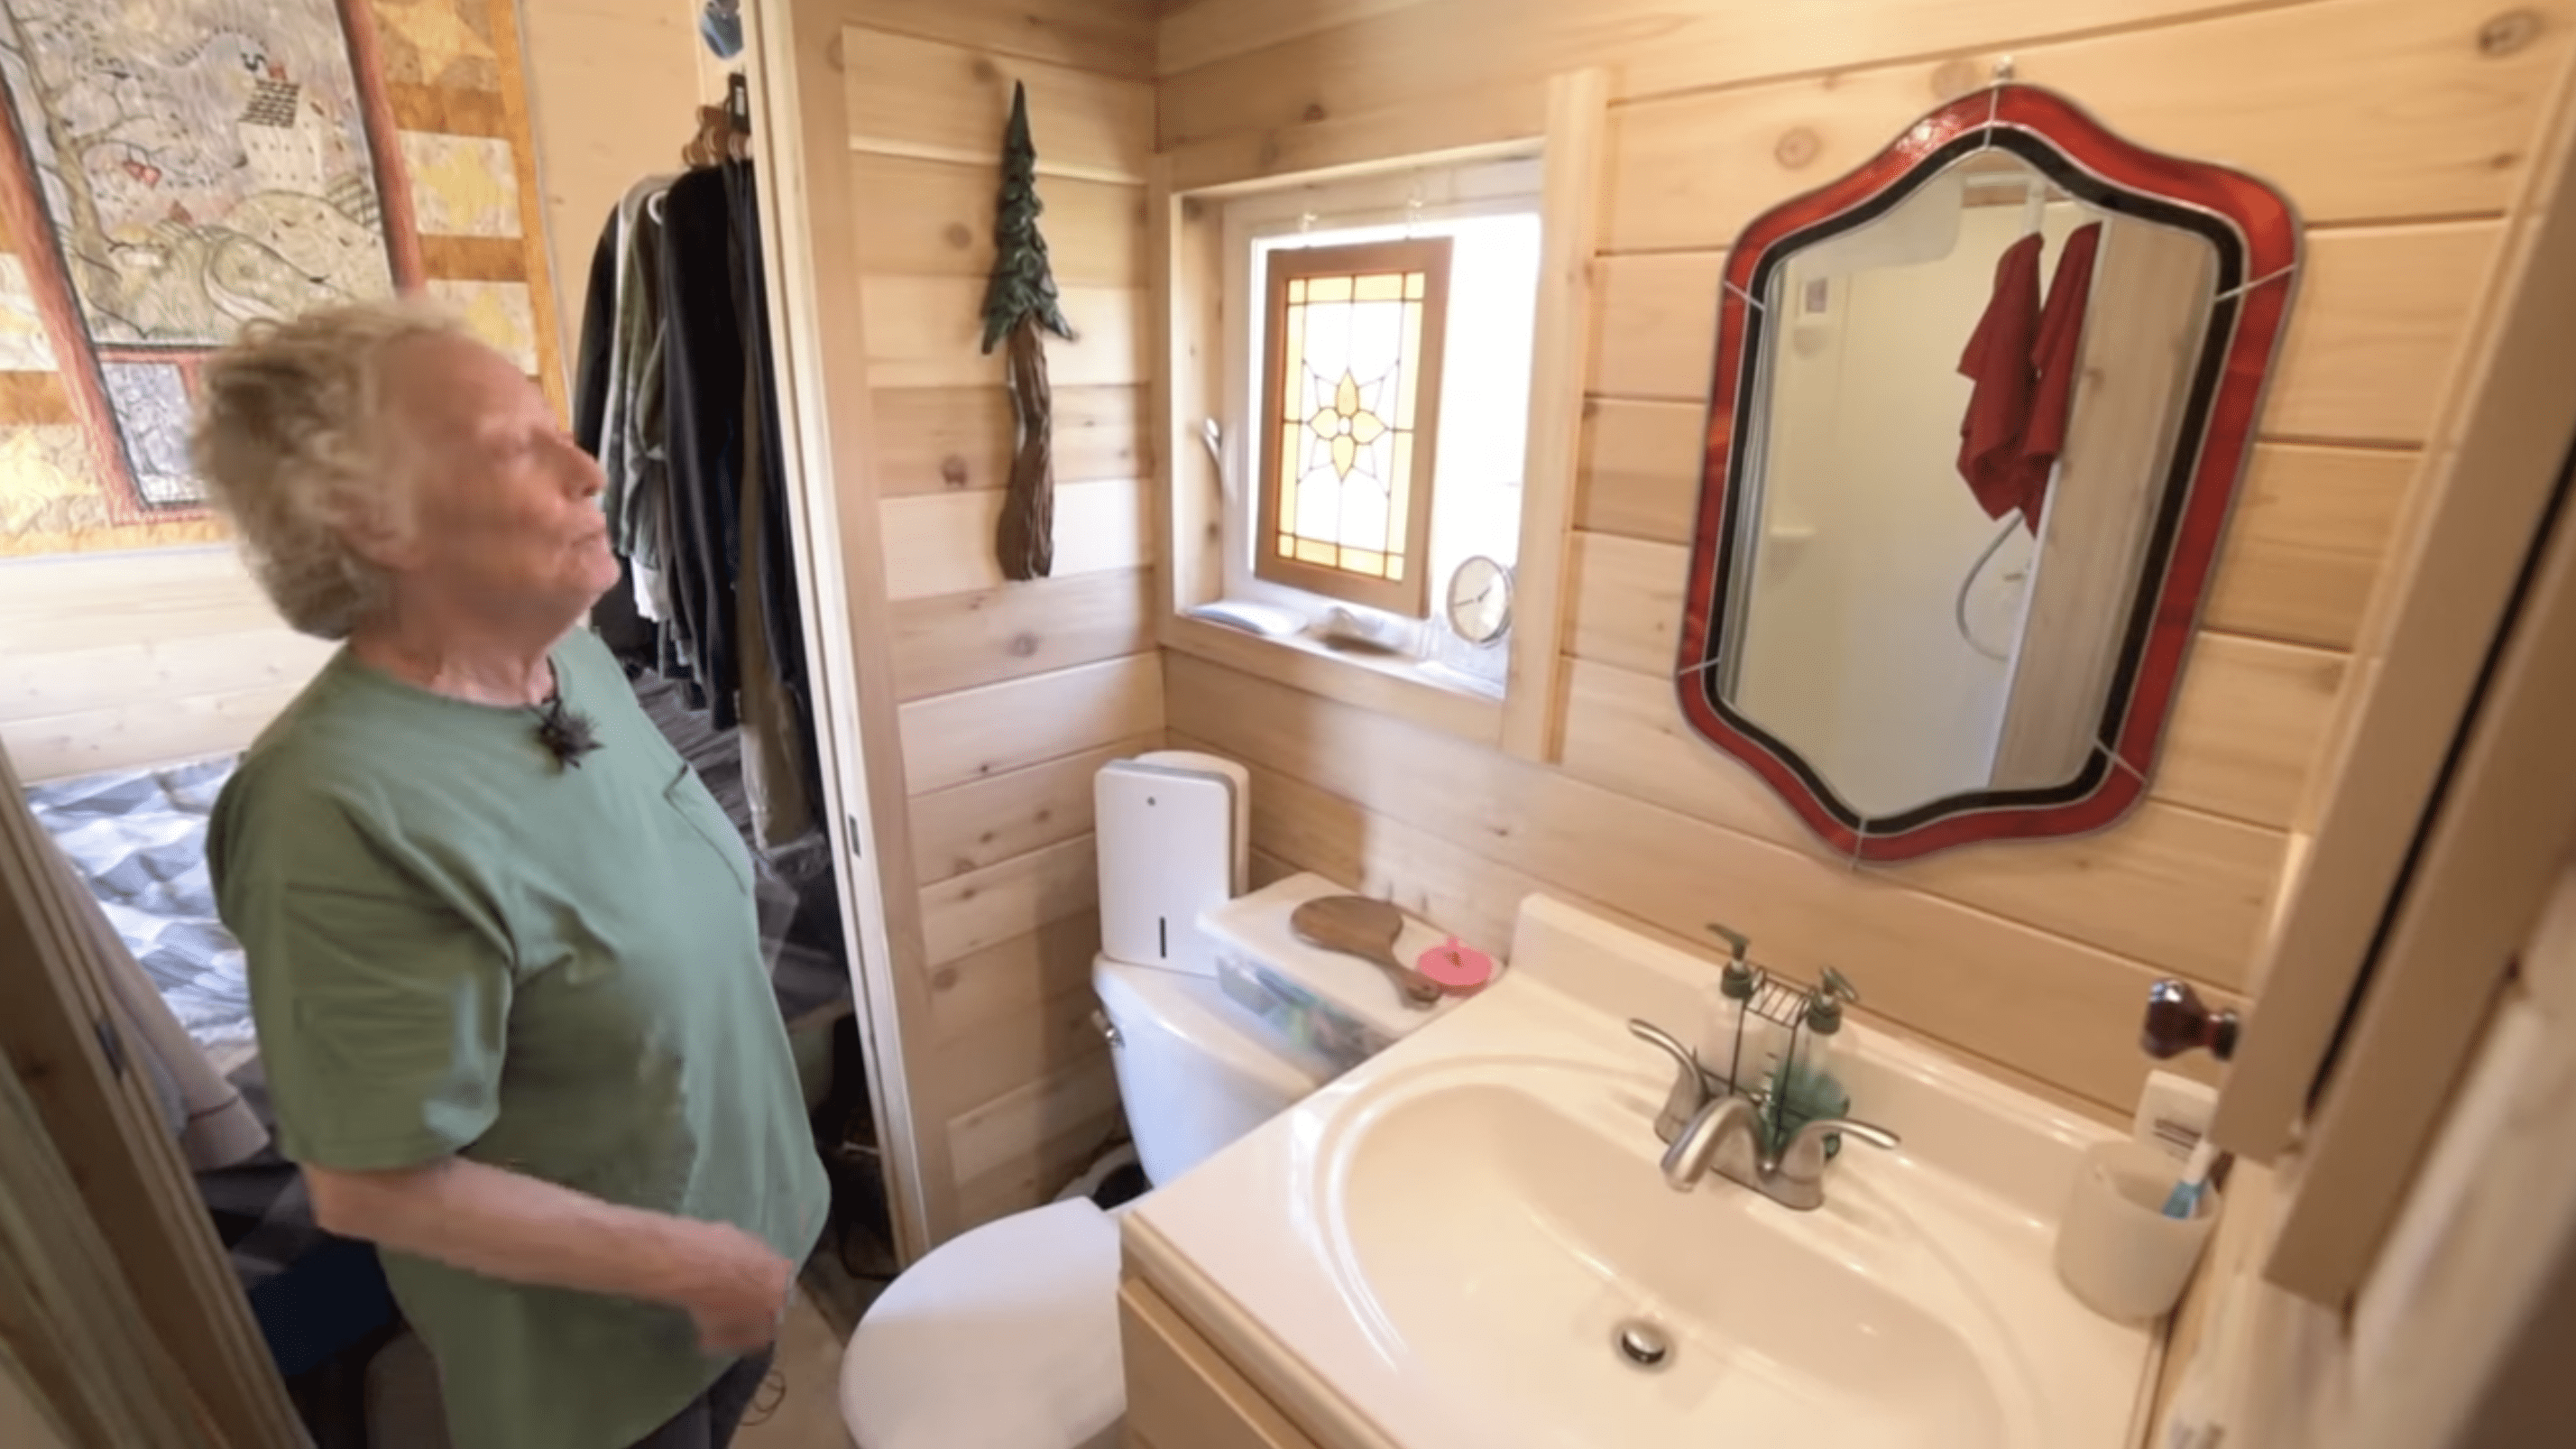 Penny shows her bathroom area. | Source: YouTube.com/TinyHomeTours